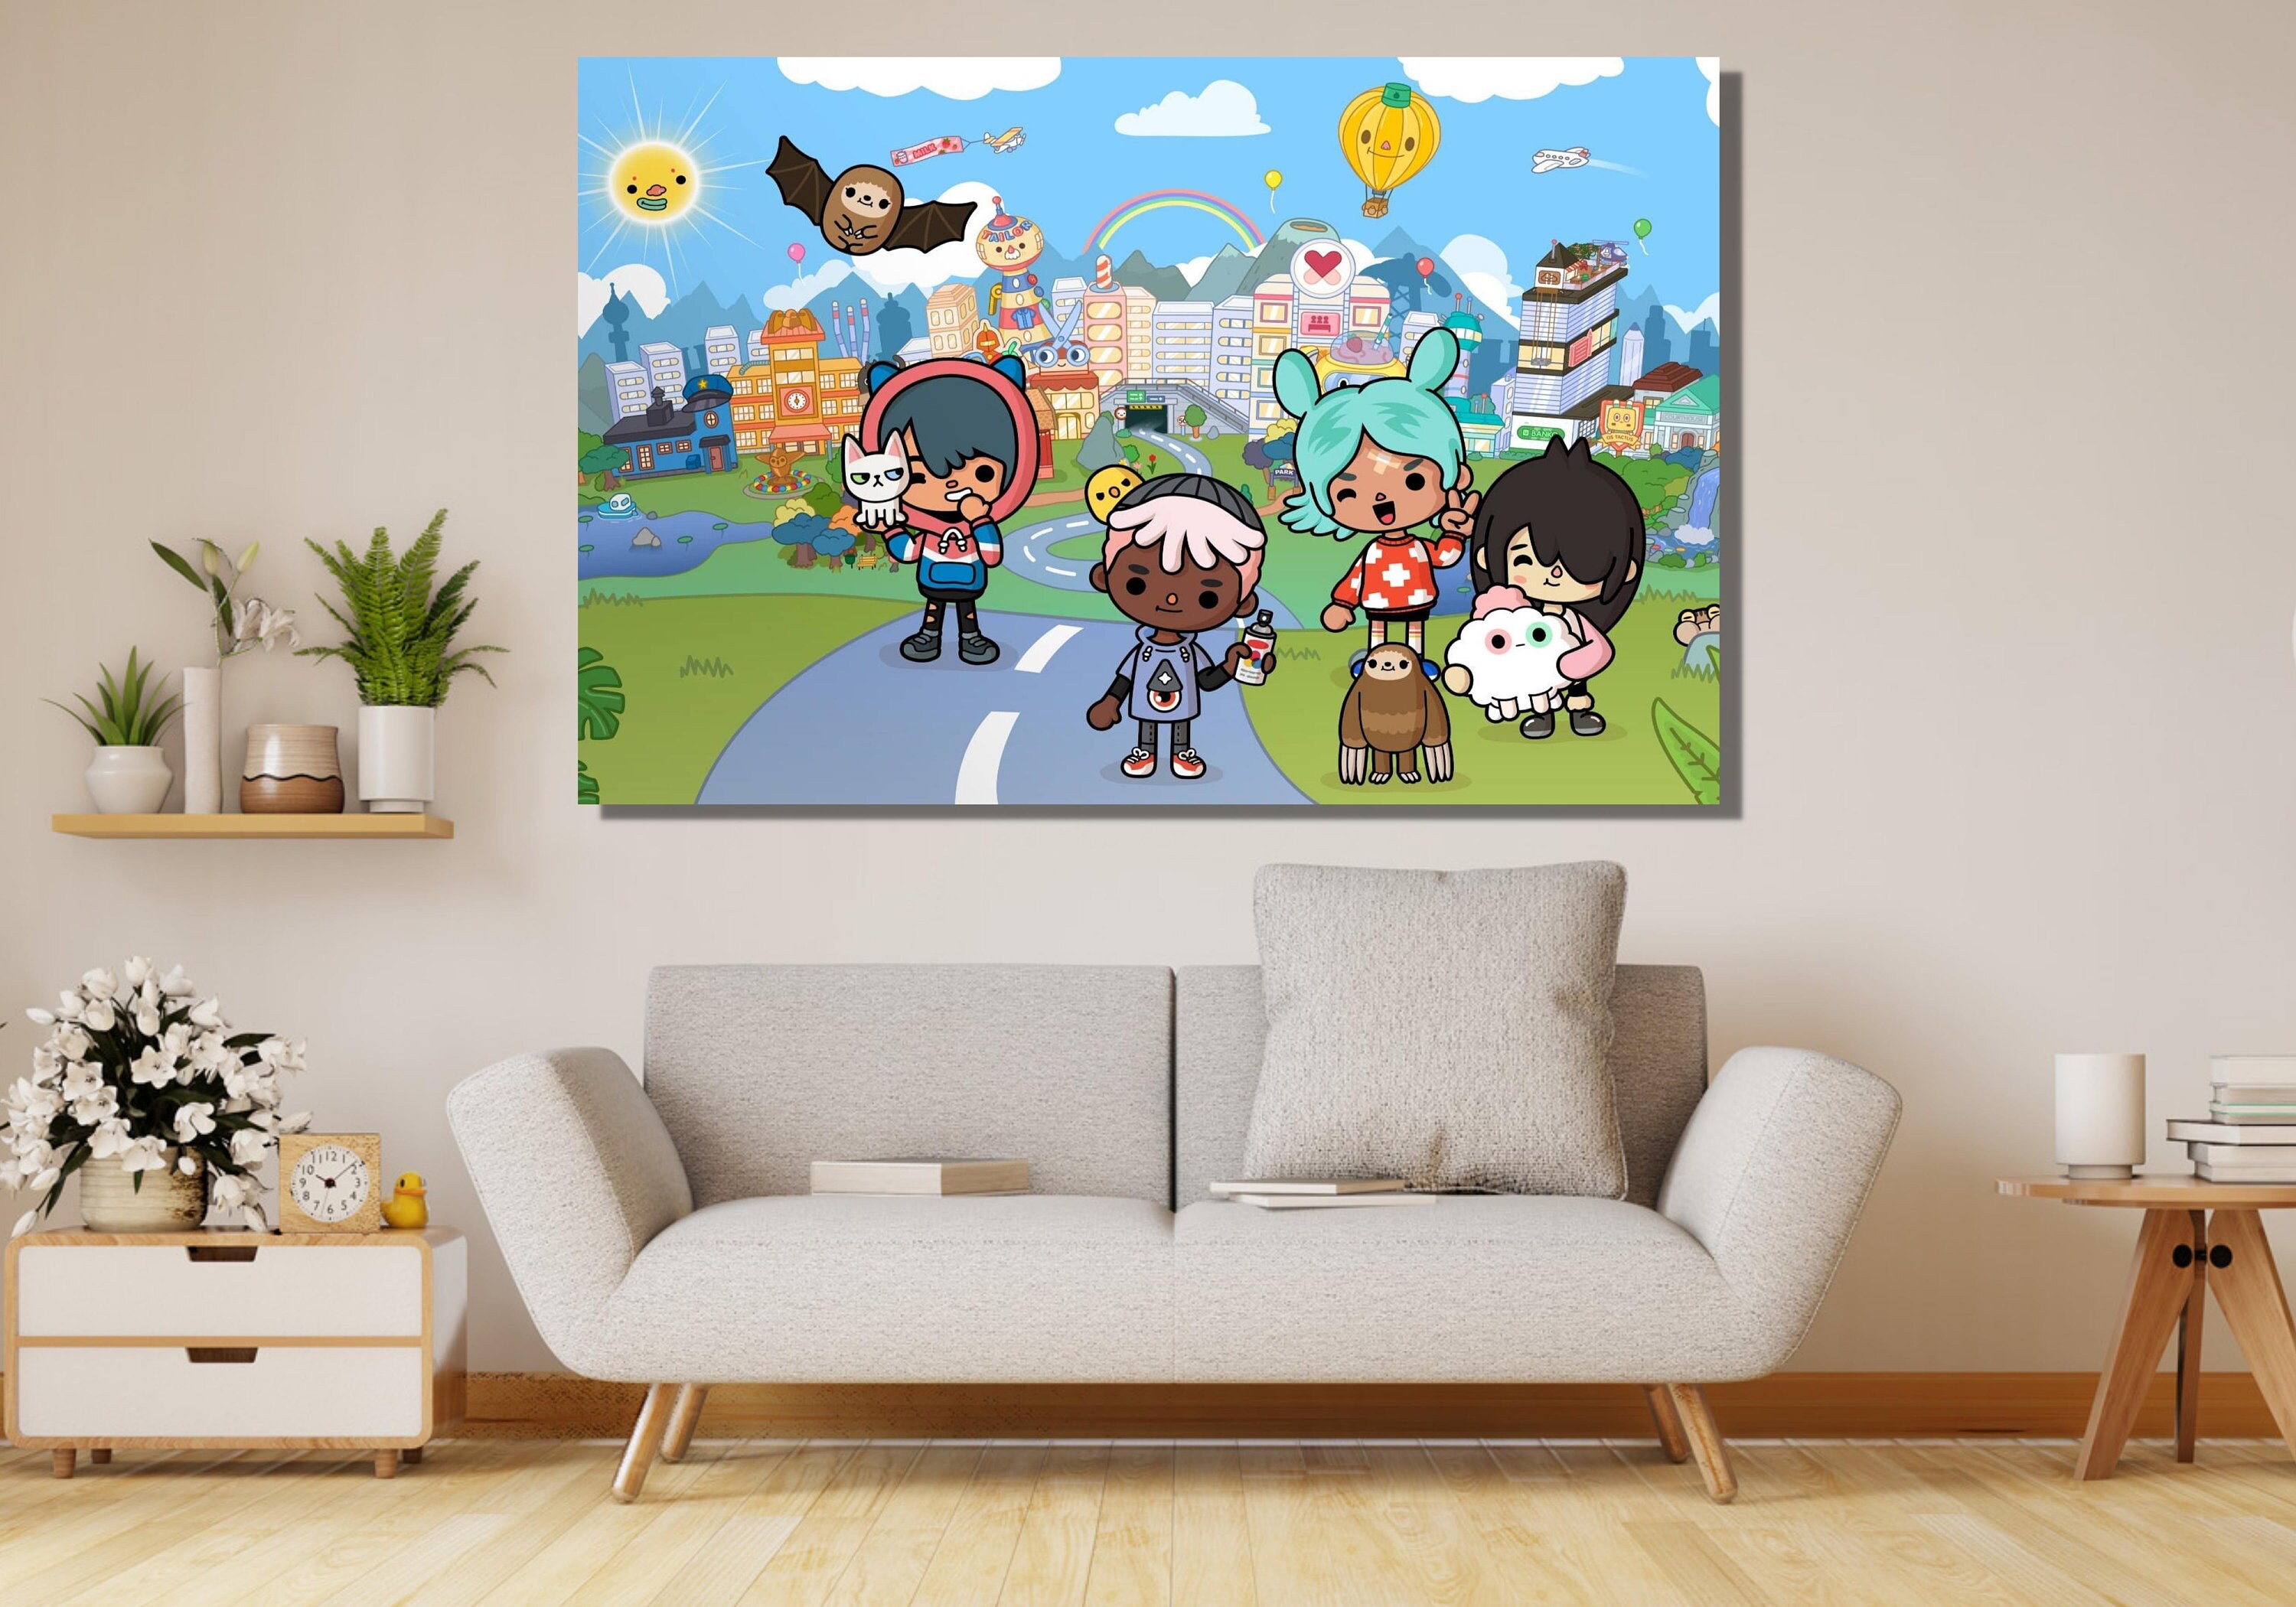  GLGFAS Toca Anime Boca Wall Art Canvas Painting Poster  Decorations For Bedroom Living Room Bathroom Framed Ready To Hang 12 x 12  Inch: Posters & Prints